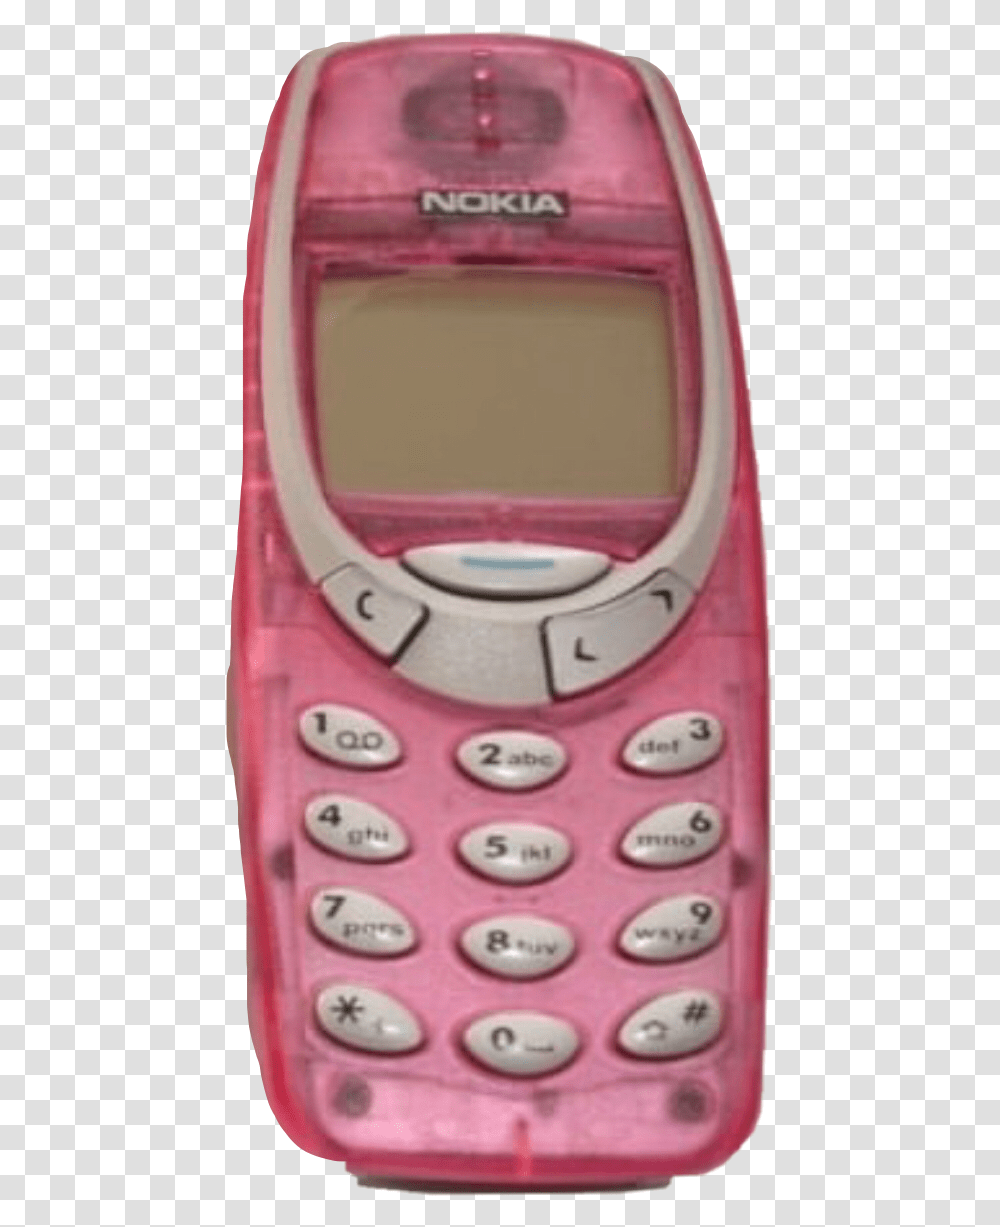 Nokia Phone Pink Cute 2000s 2000saesthetic Vintage 2000s Aesthetic Phone, Electronics, Mobile Phone Transparent Png